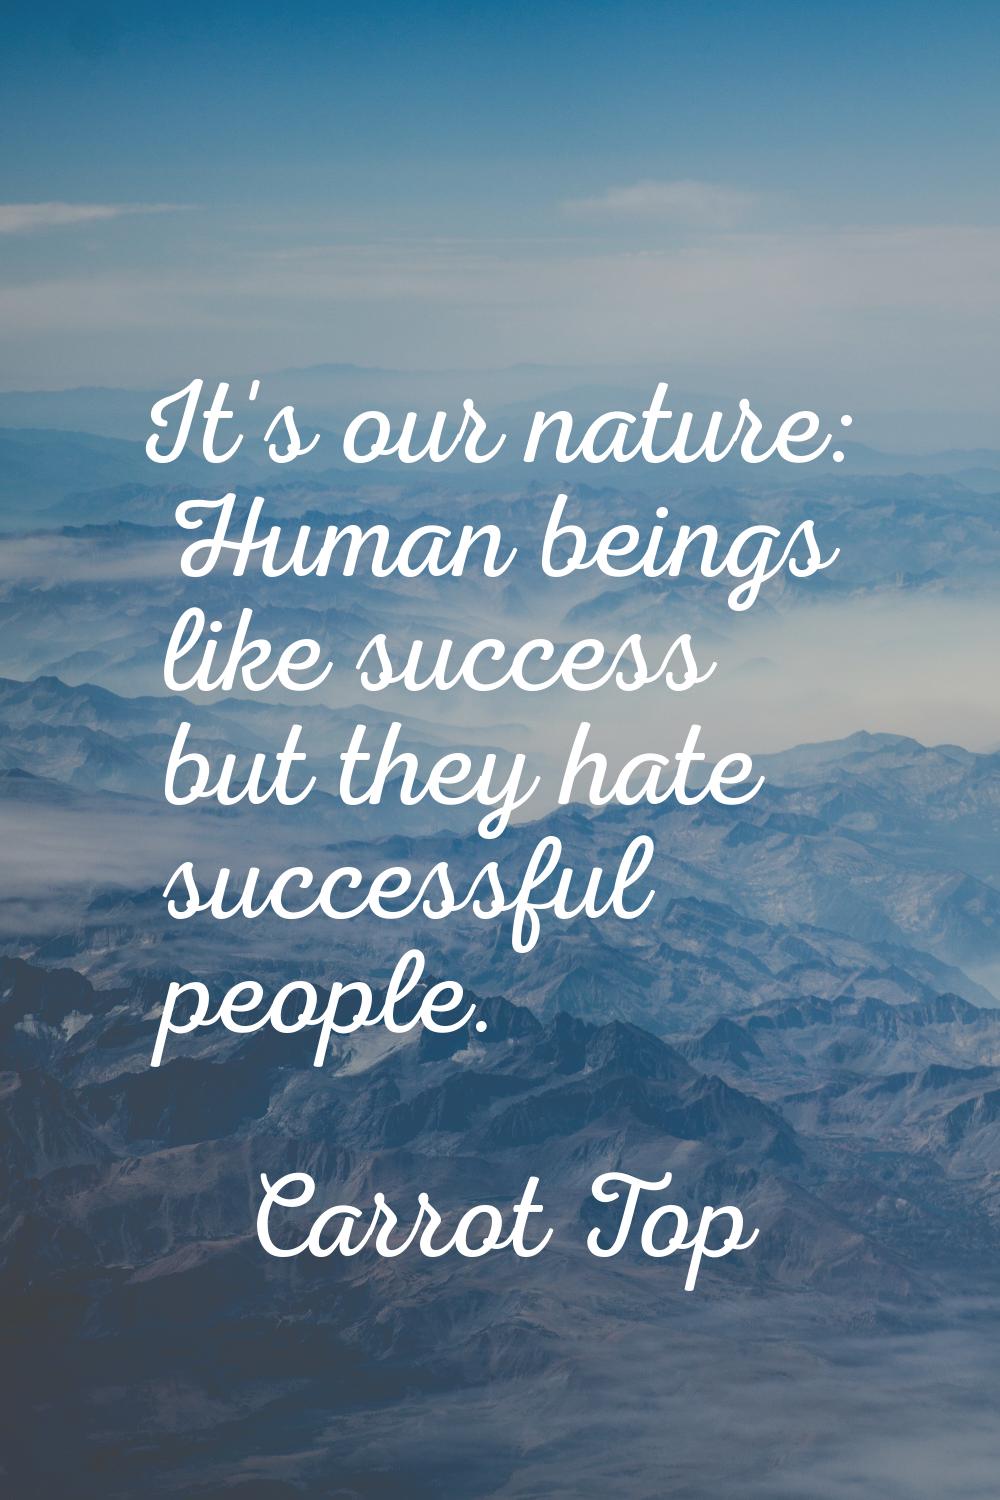 It's our nature: Human beings like success but they hate successful people.